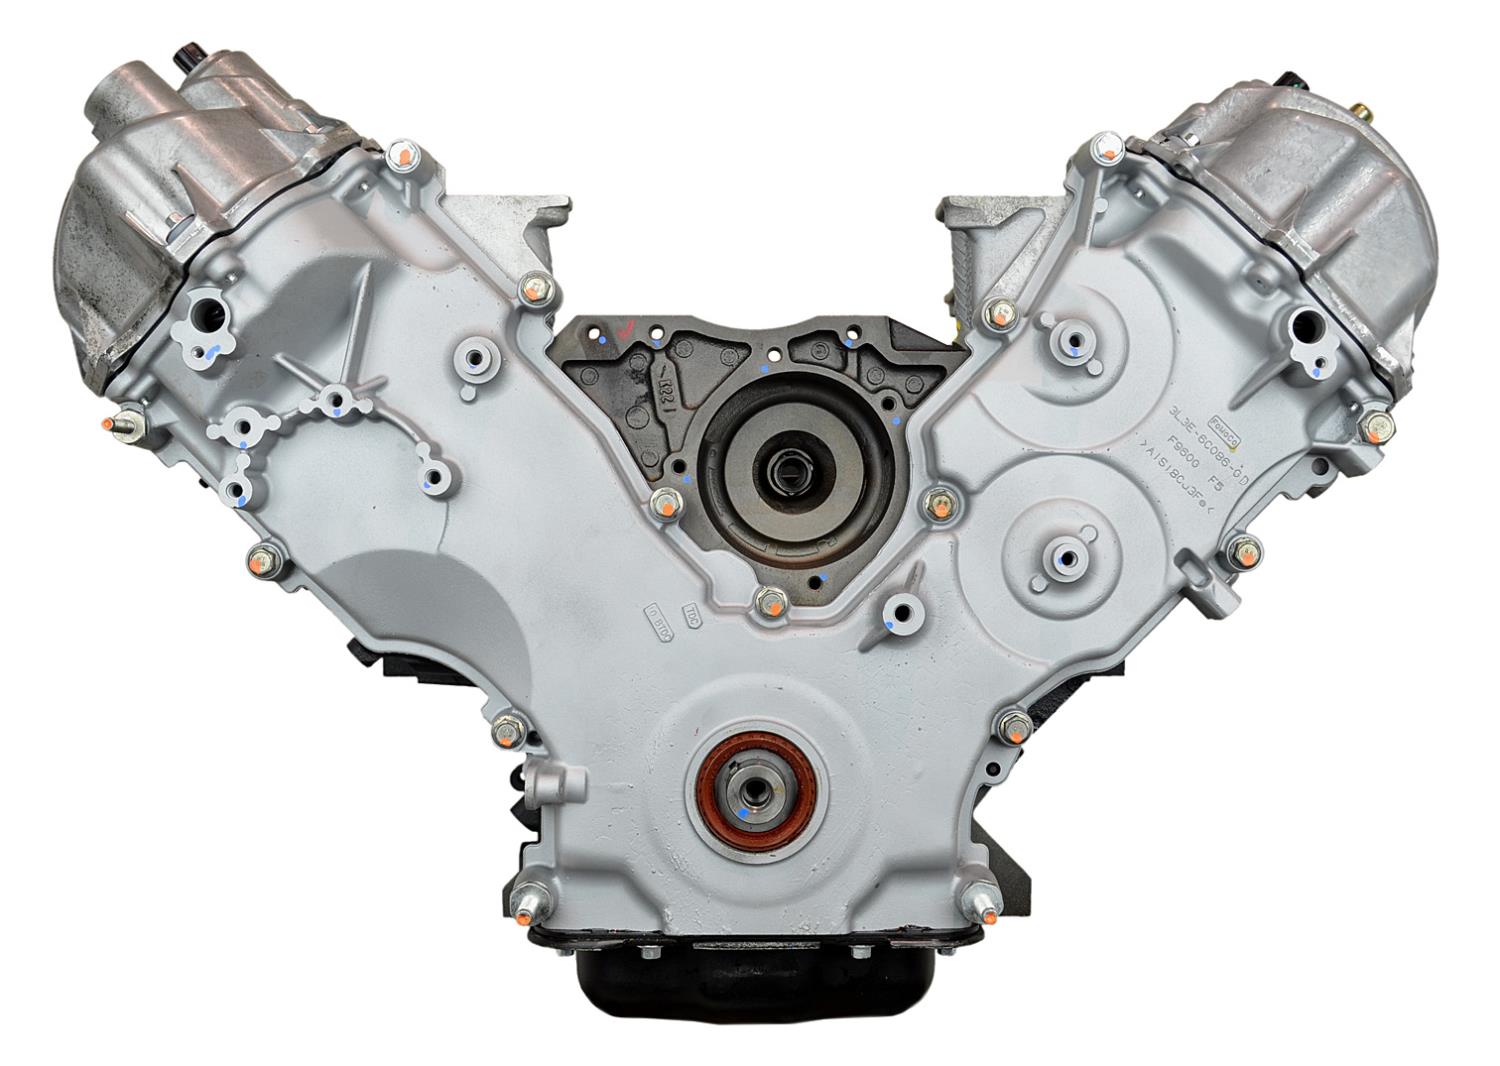 VFDV Remanufactured Crate Engine for 2004-2008 Ford F-Series Truck & Expedition with 5.4L V8